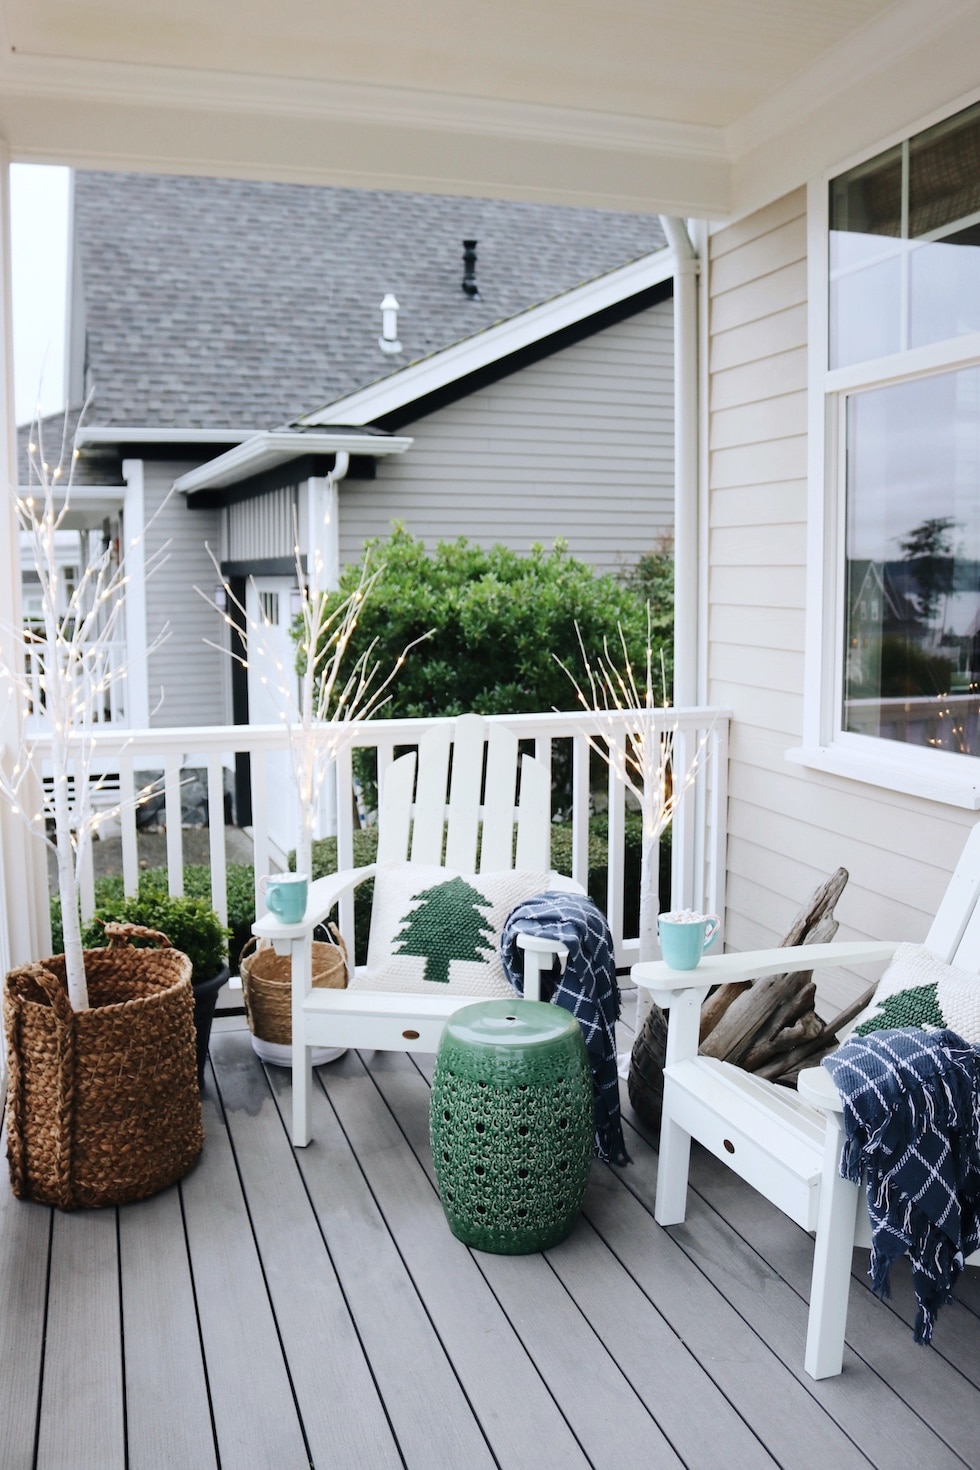 A Simple Winter Front Porch (+ My Method for Christmas Decorating that Won't Feel Overwhelming)